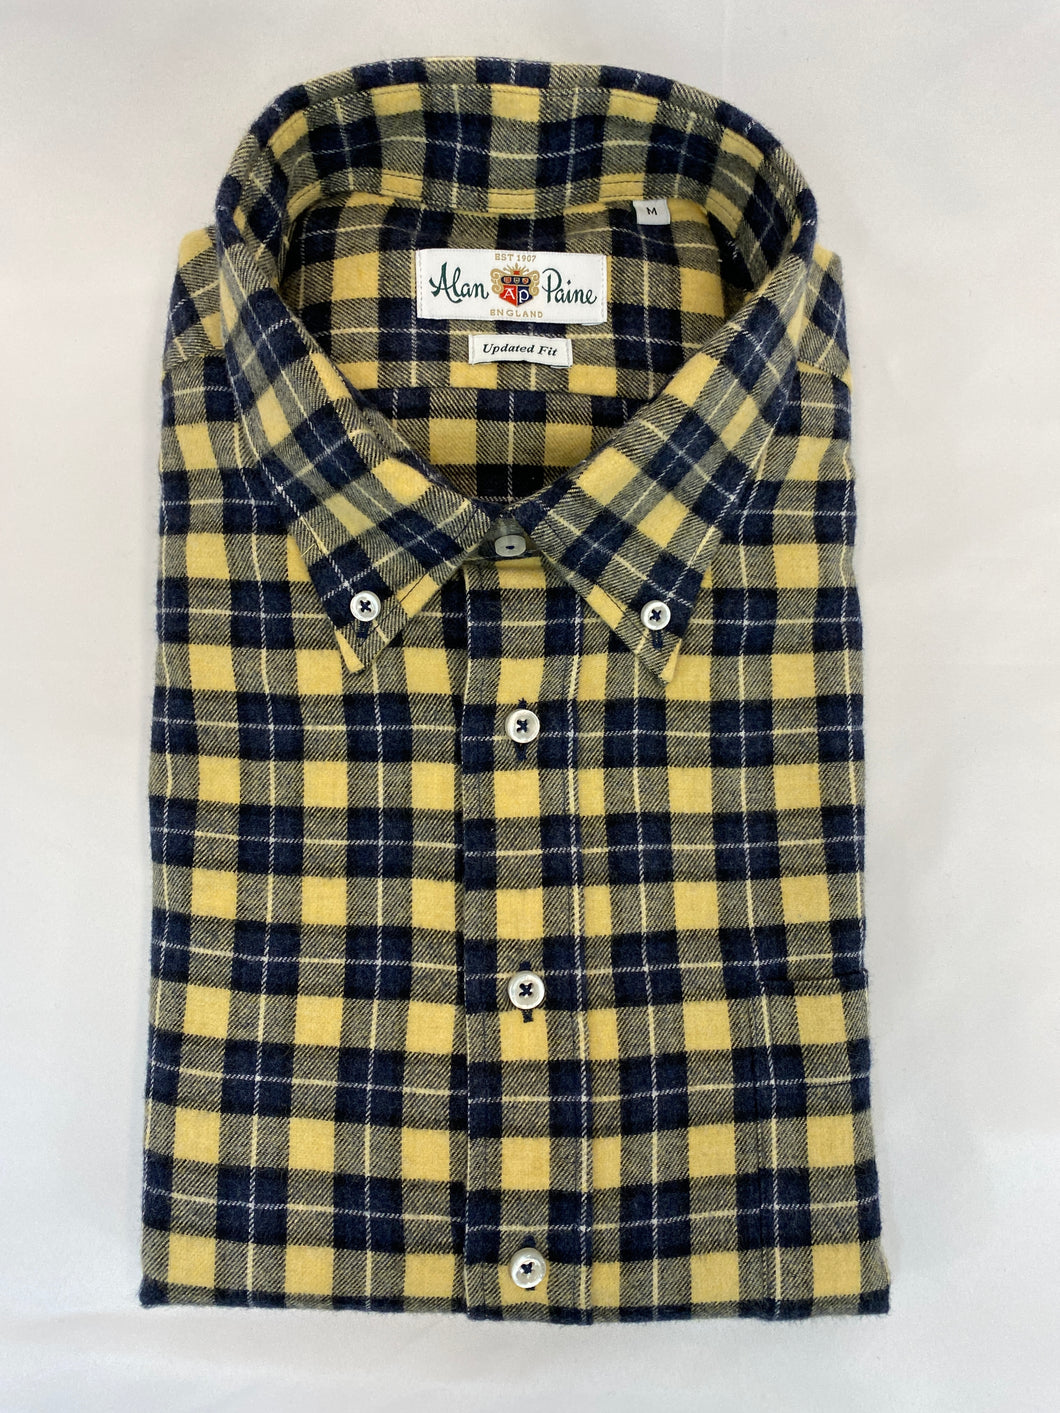 Alan Paine Flannel Button Down Shirt Yellow Grey Plaid